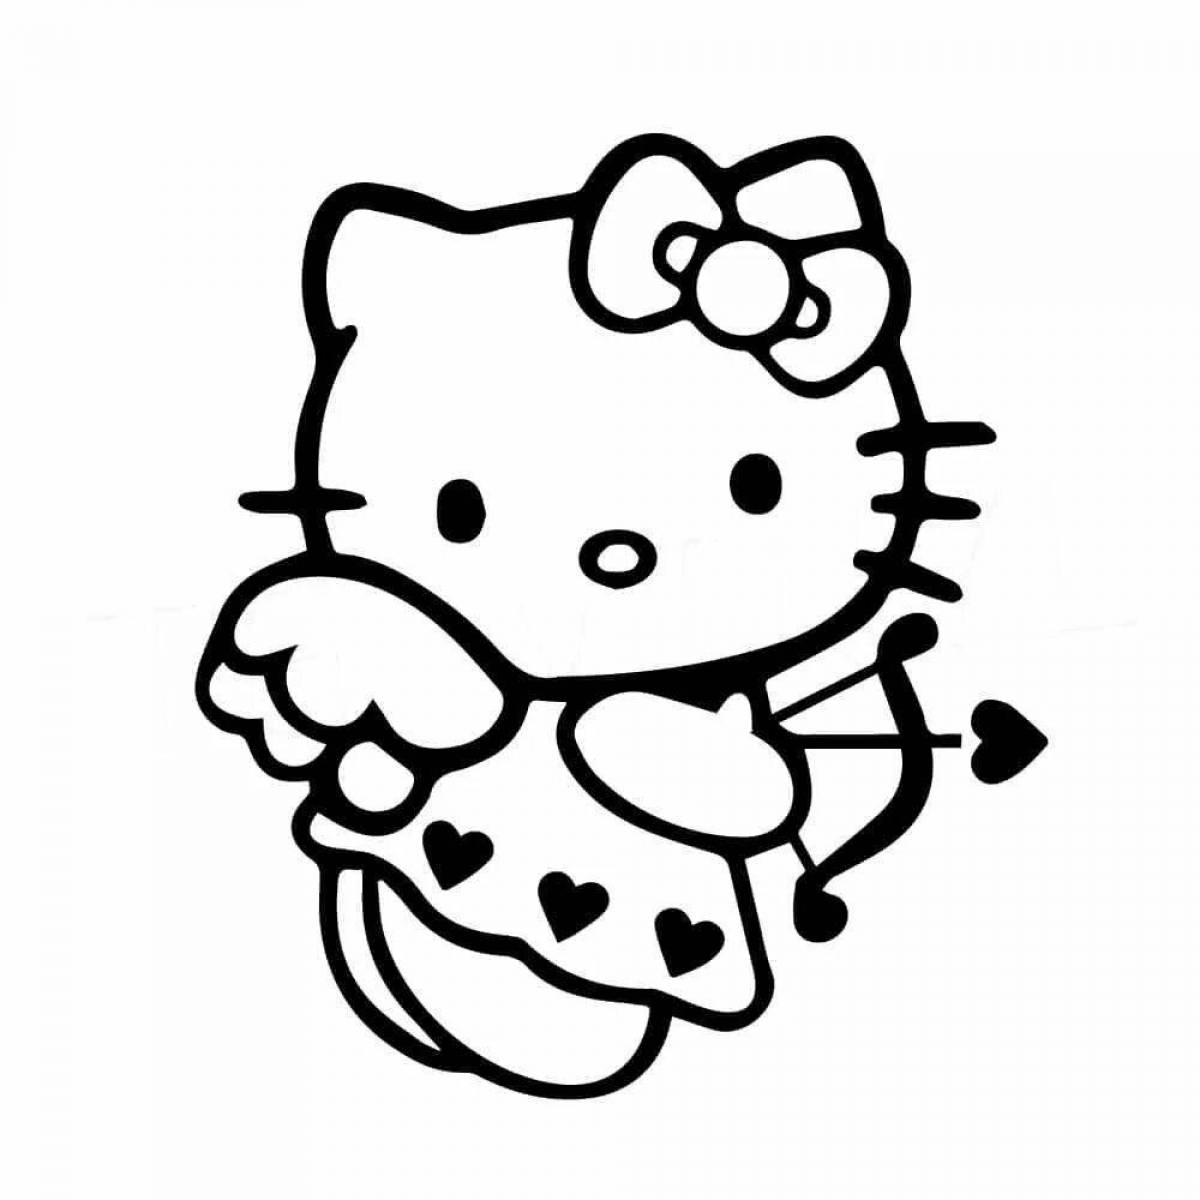 Great hello kitty punk coloring book